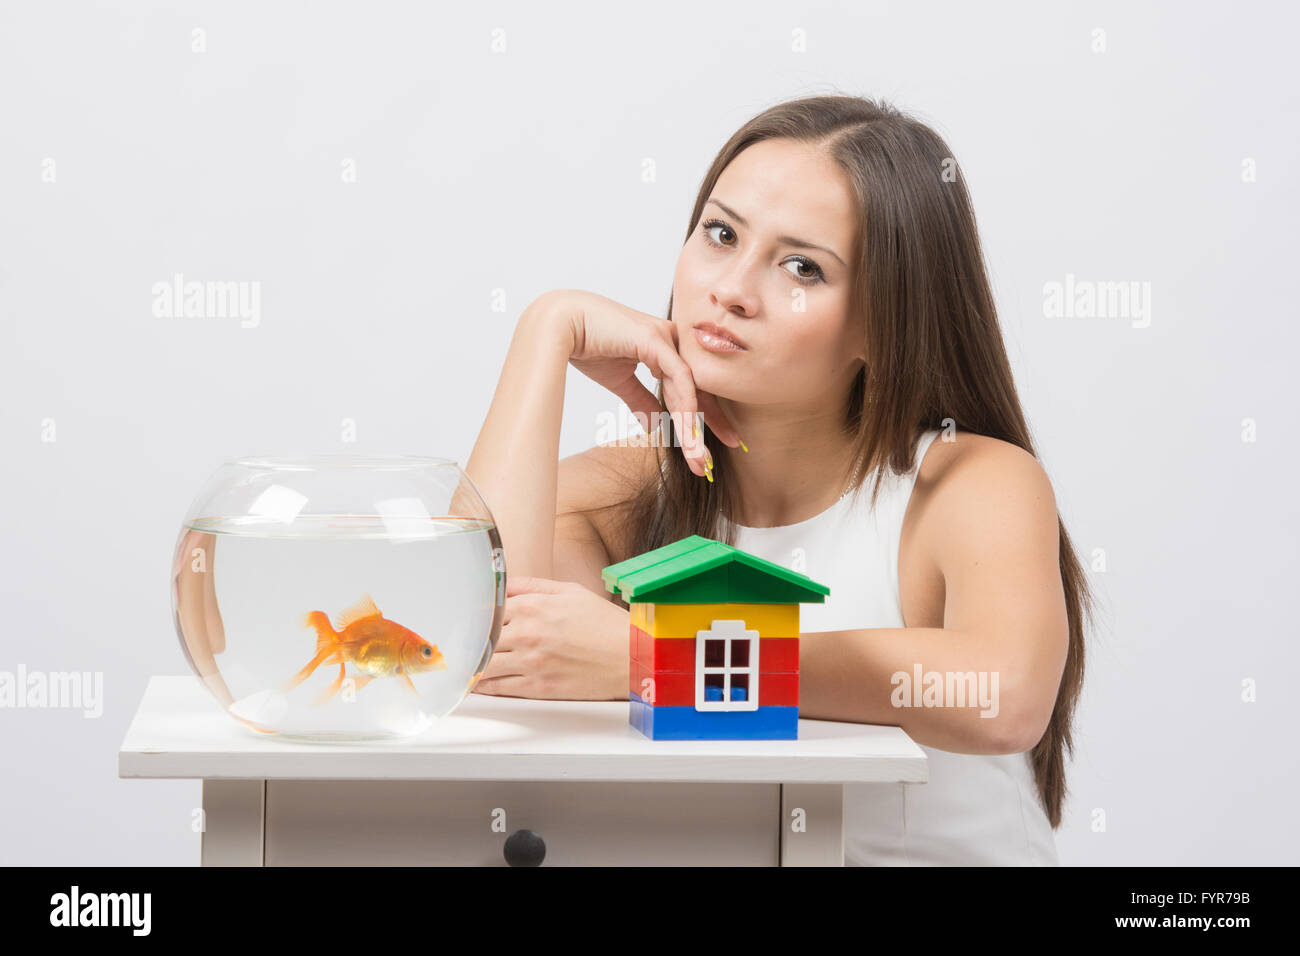 Thoughtful girl sitting at a table on which there is an aquarium with goldfish and toy house Stock Photo